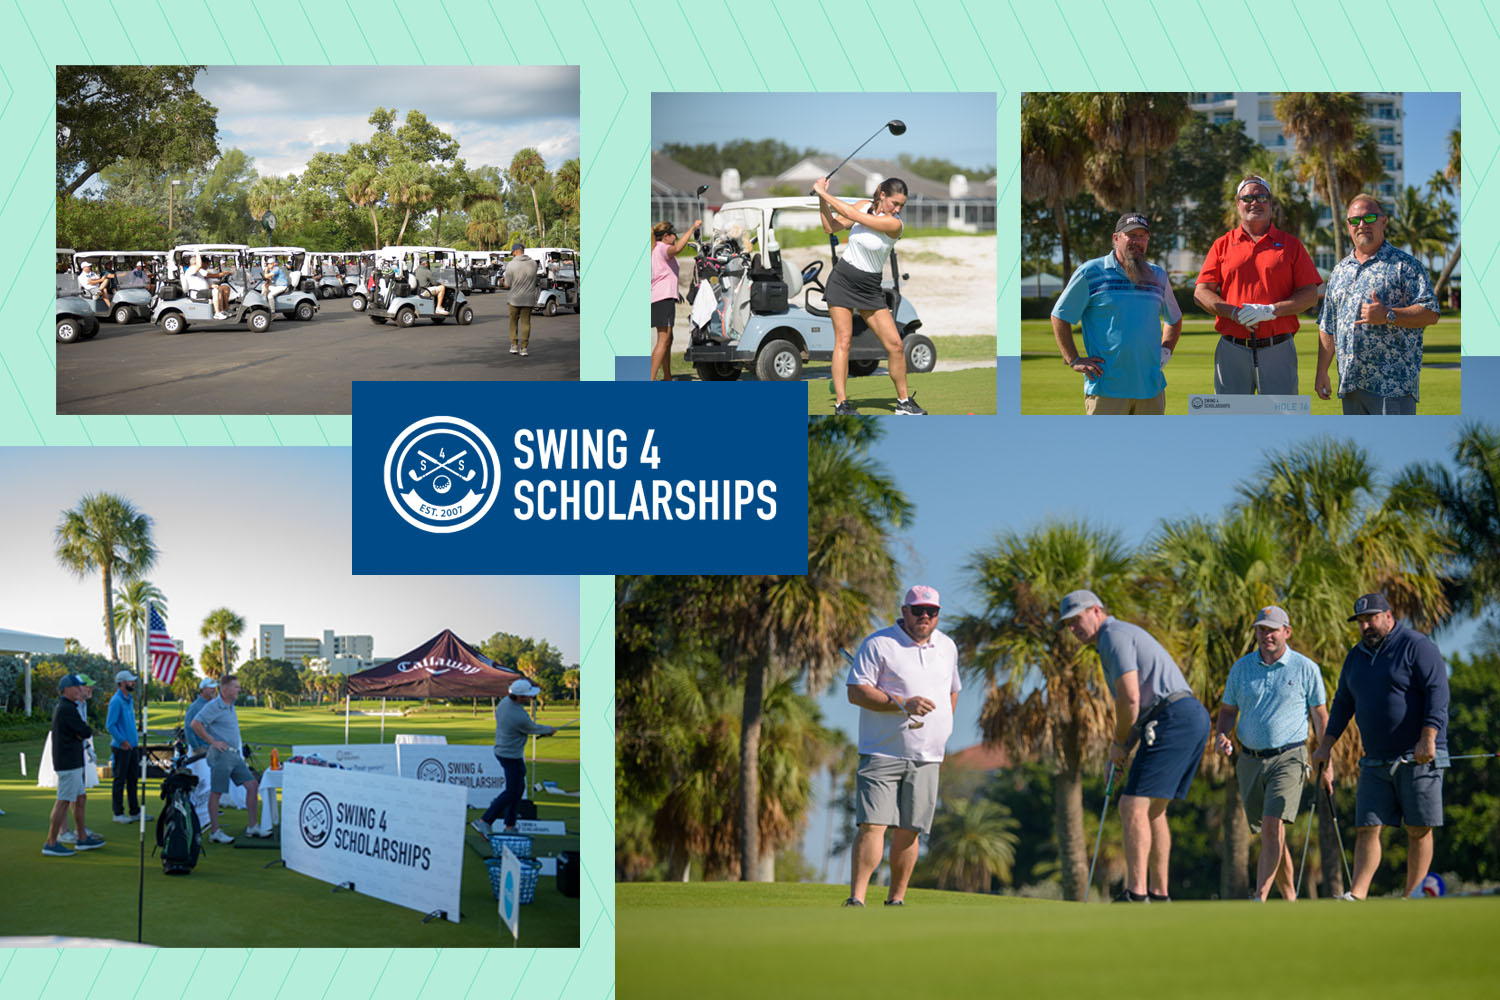 Balfour Beatty Communities Hosts 13th Annual Swing 4 Scholarships Charity Golf Event